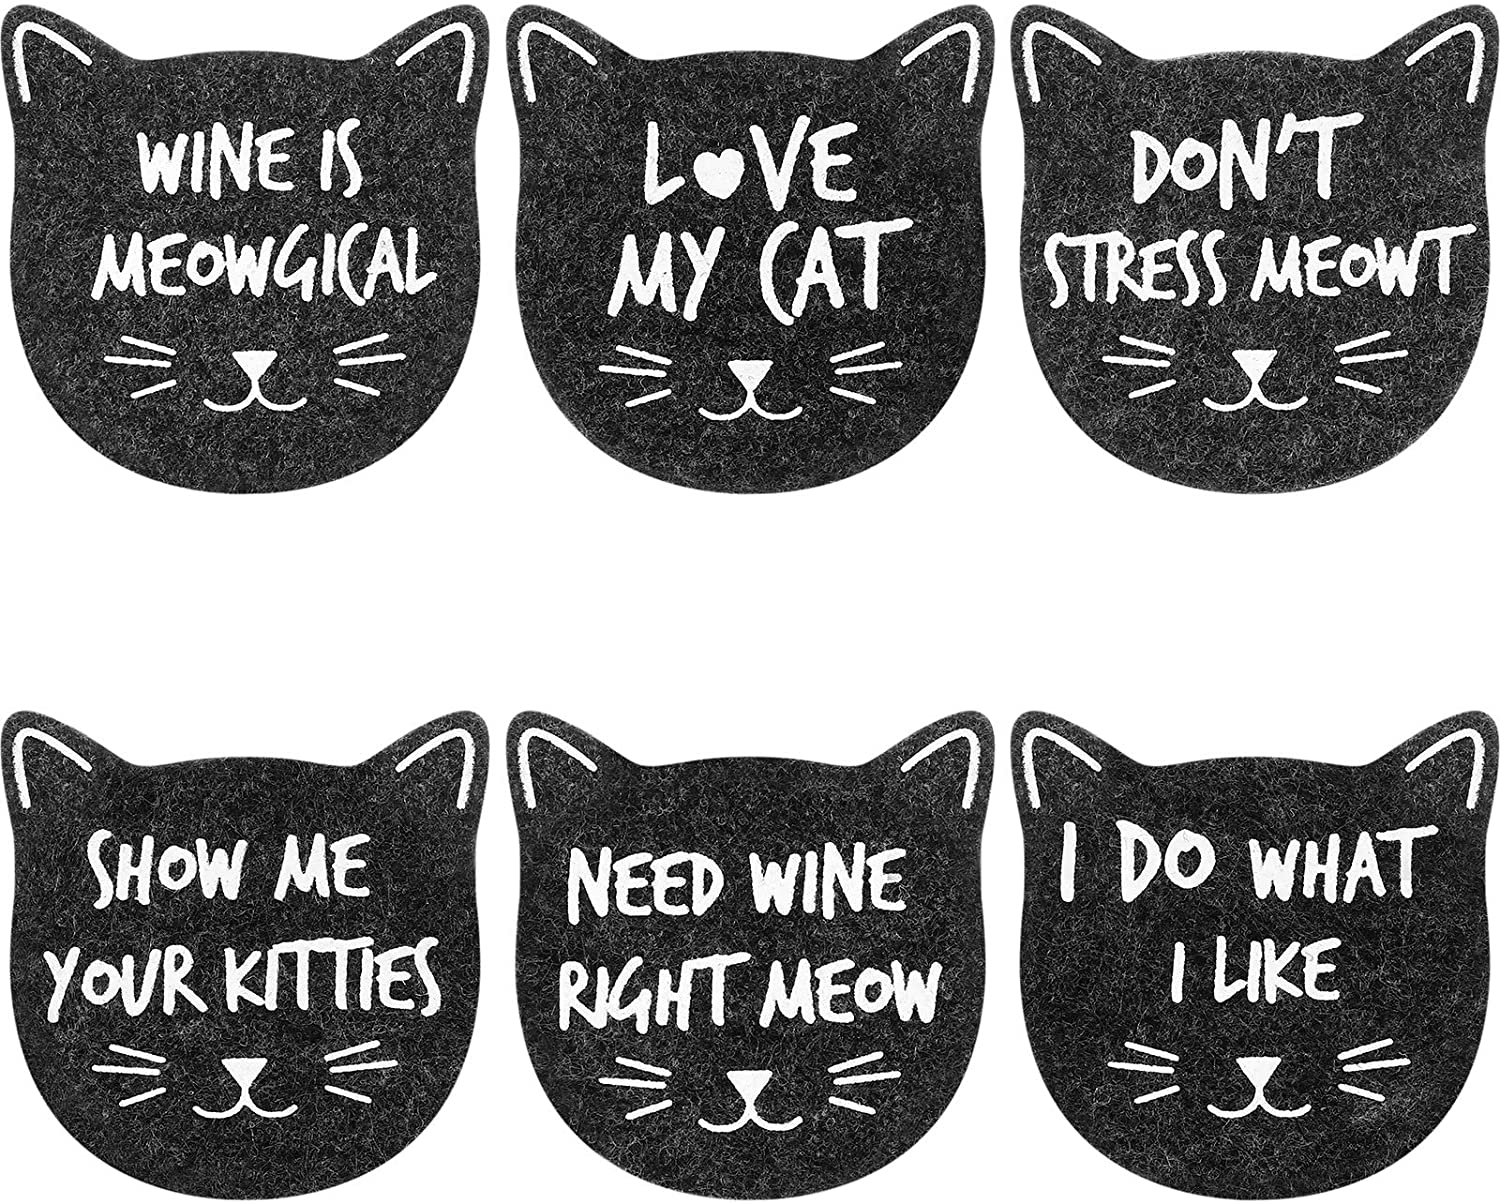 6 Pieces Cat Coasters Felt Cup Mat for Wine, Glass, Tea Home House Kitchen Table Decor